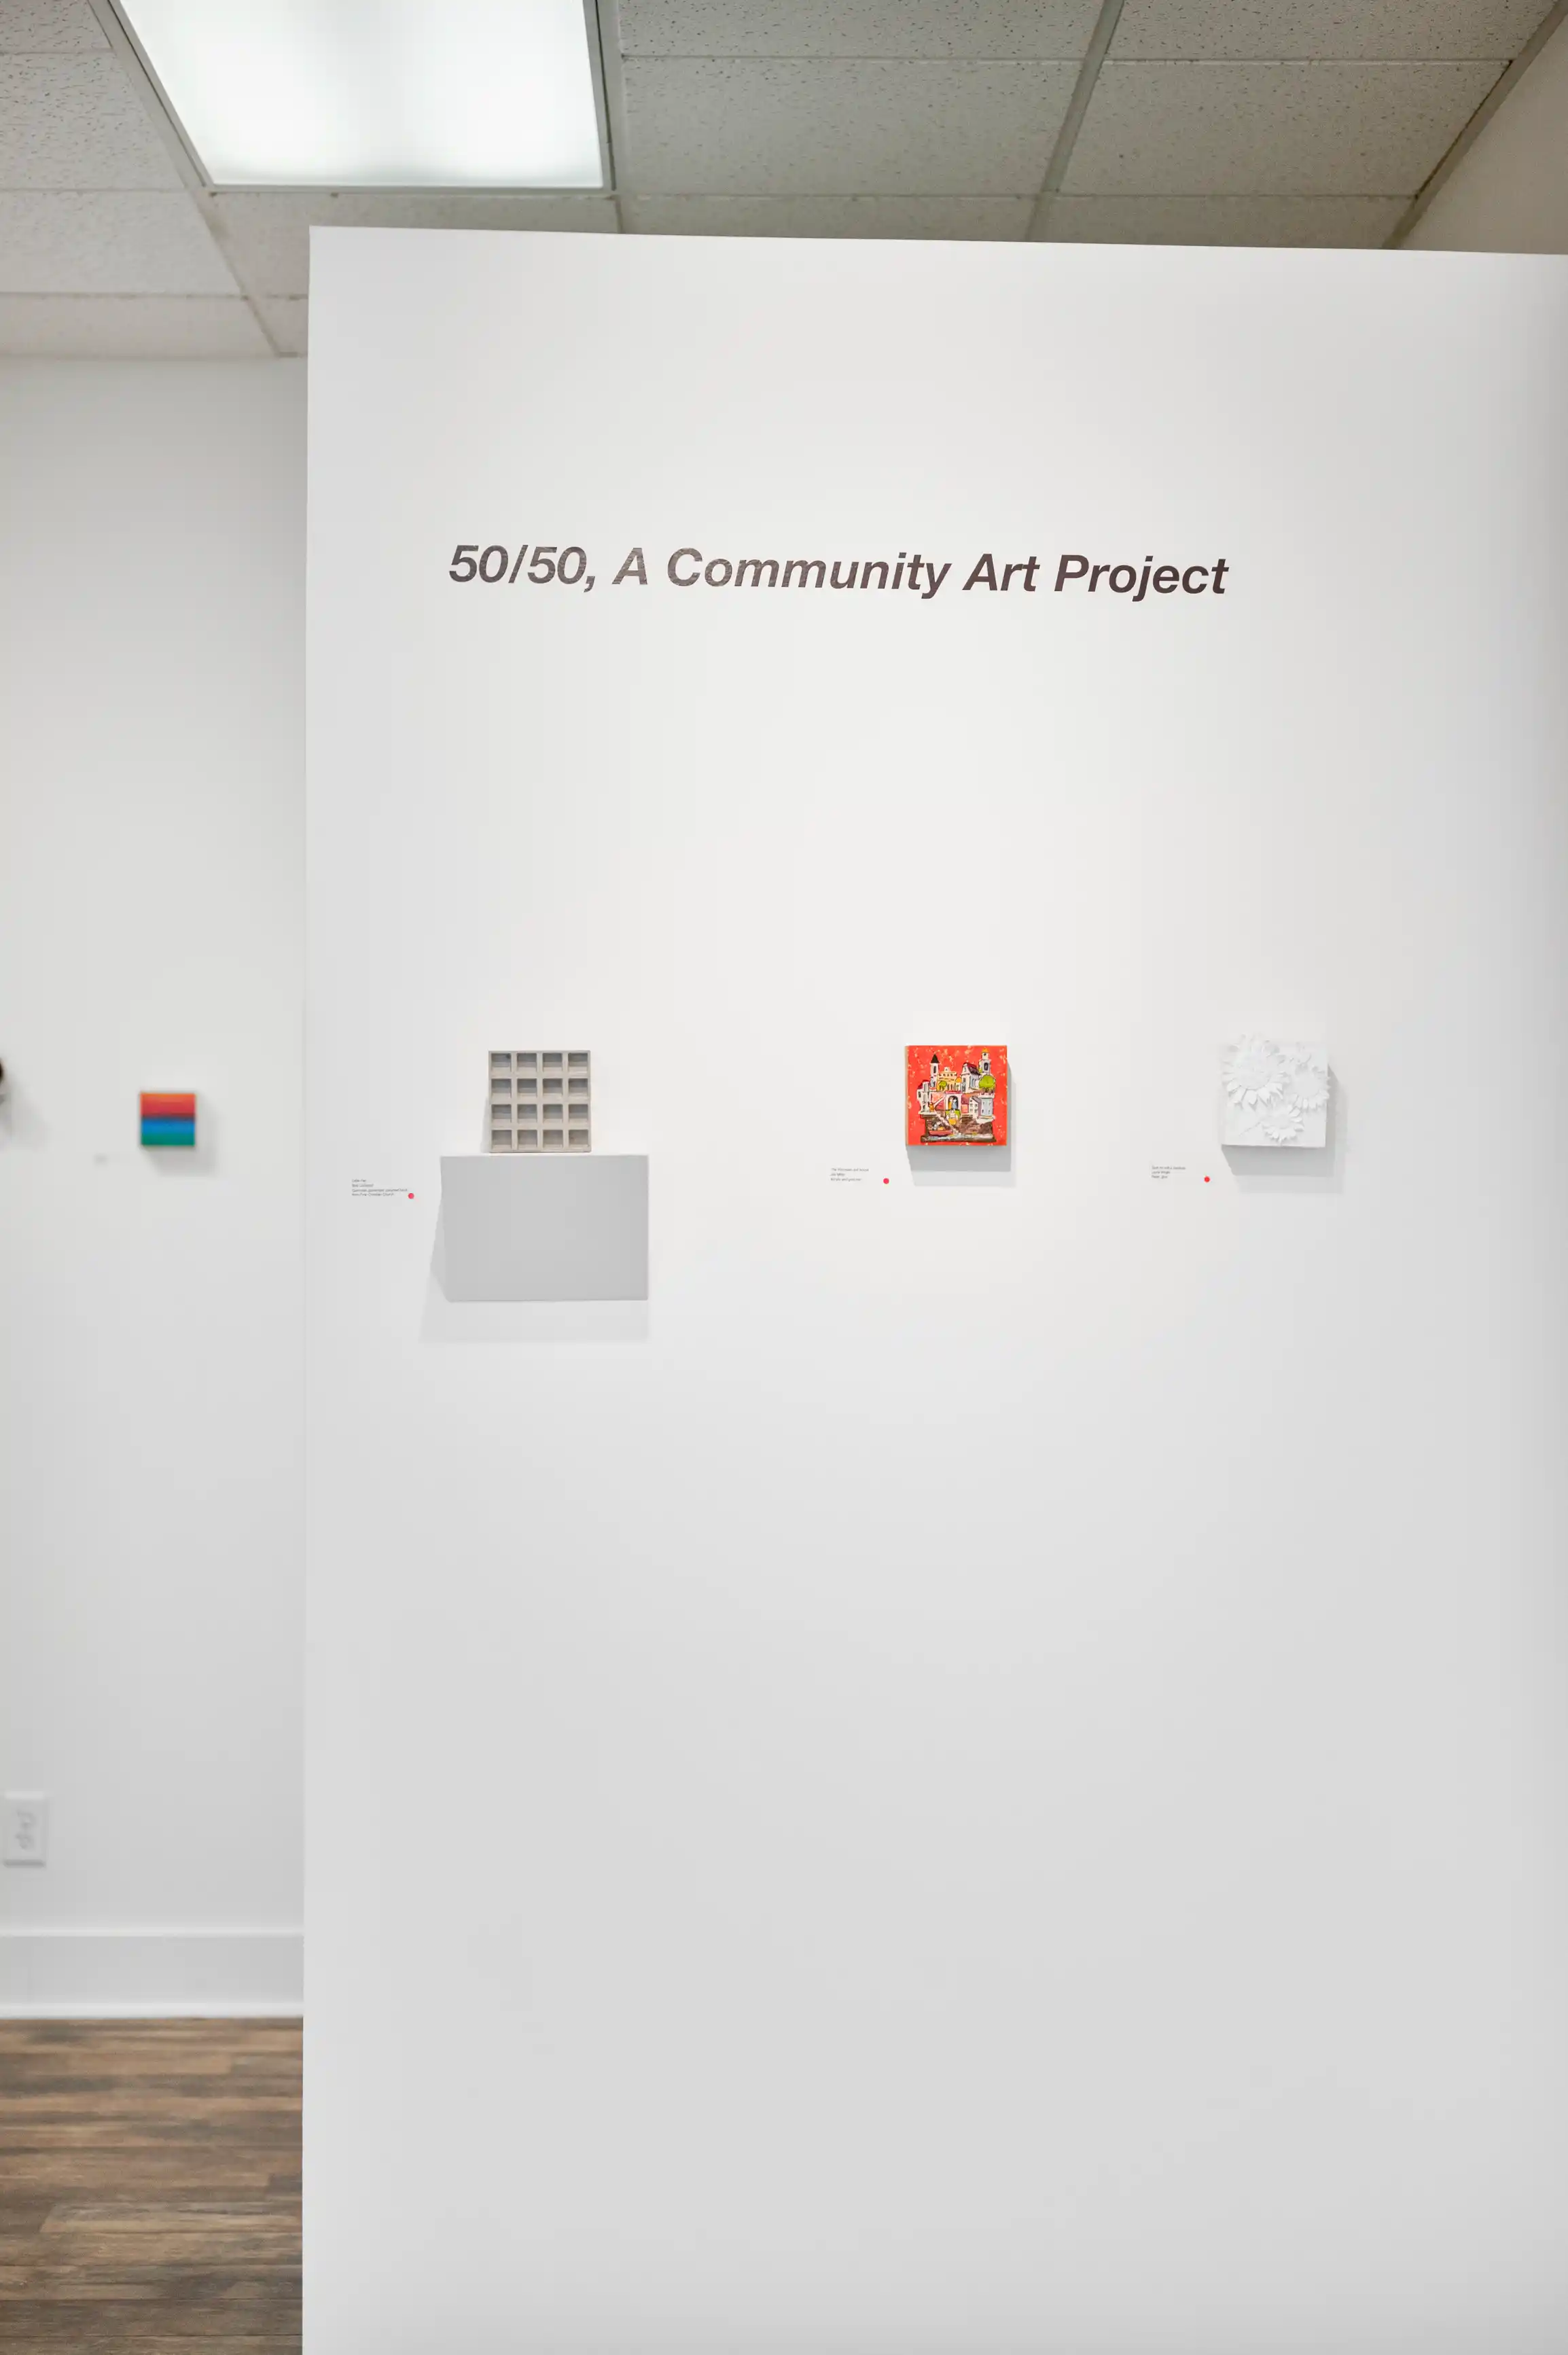 Interior of an art gallery featuring the "50/50, A Community Art Project" with various small artworks displayed on a white wall.